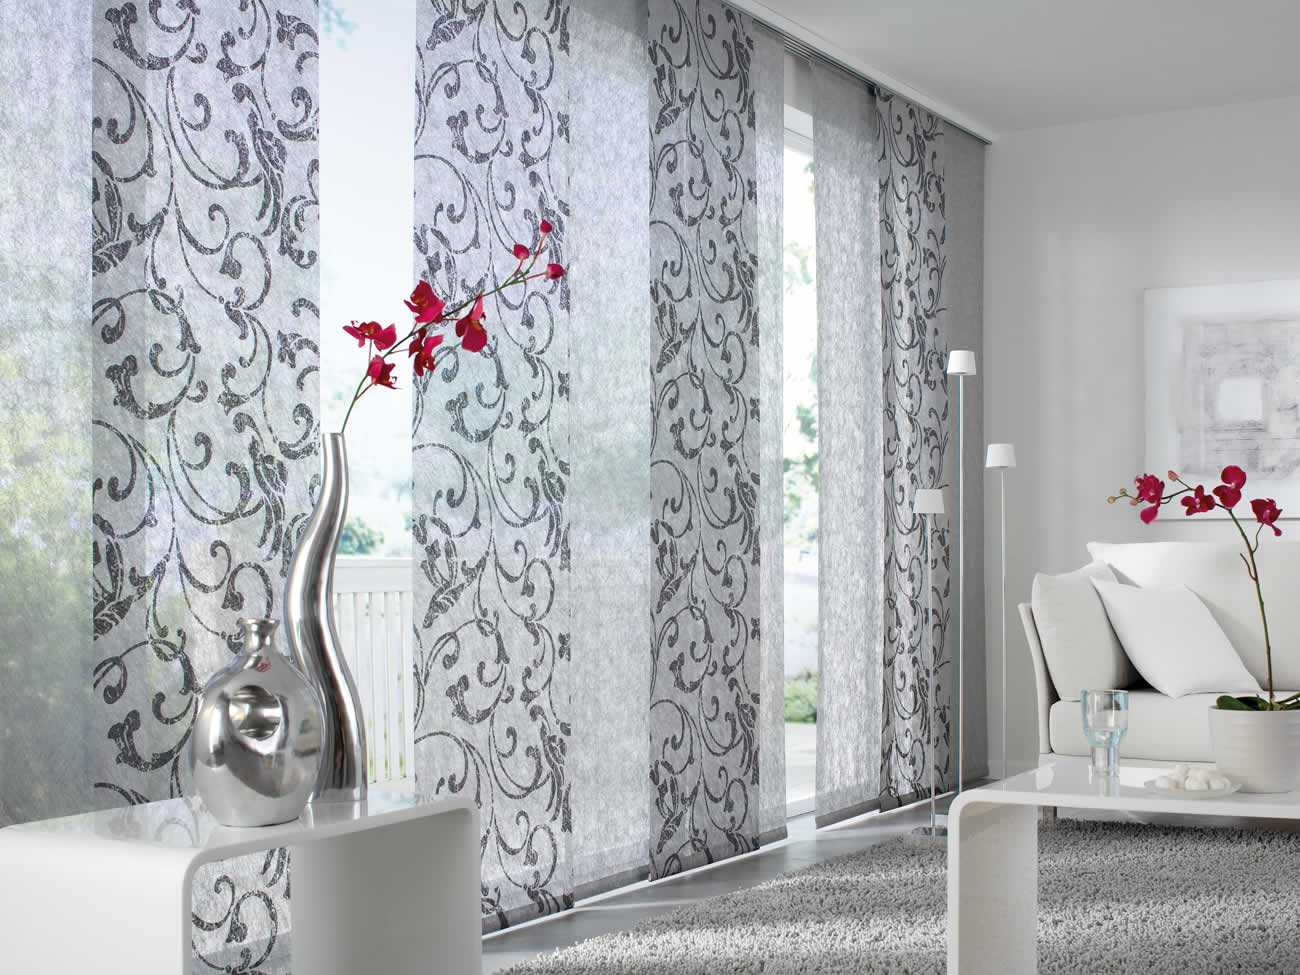 variant of unusual decor of curtains